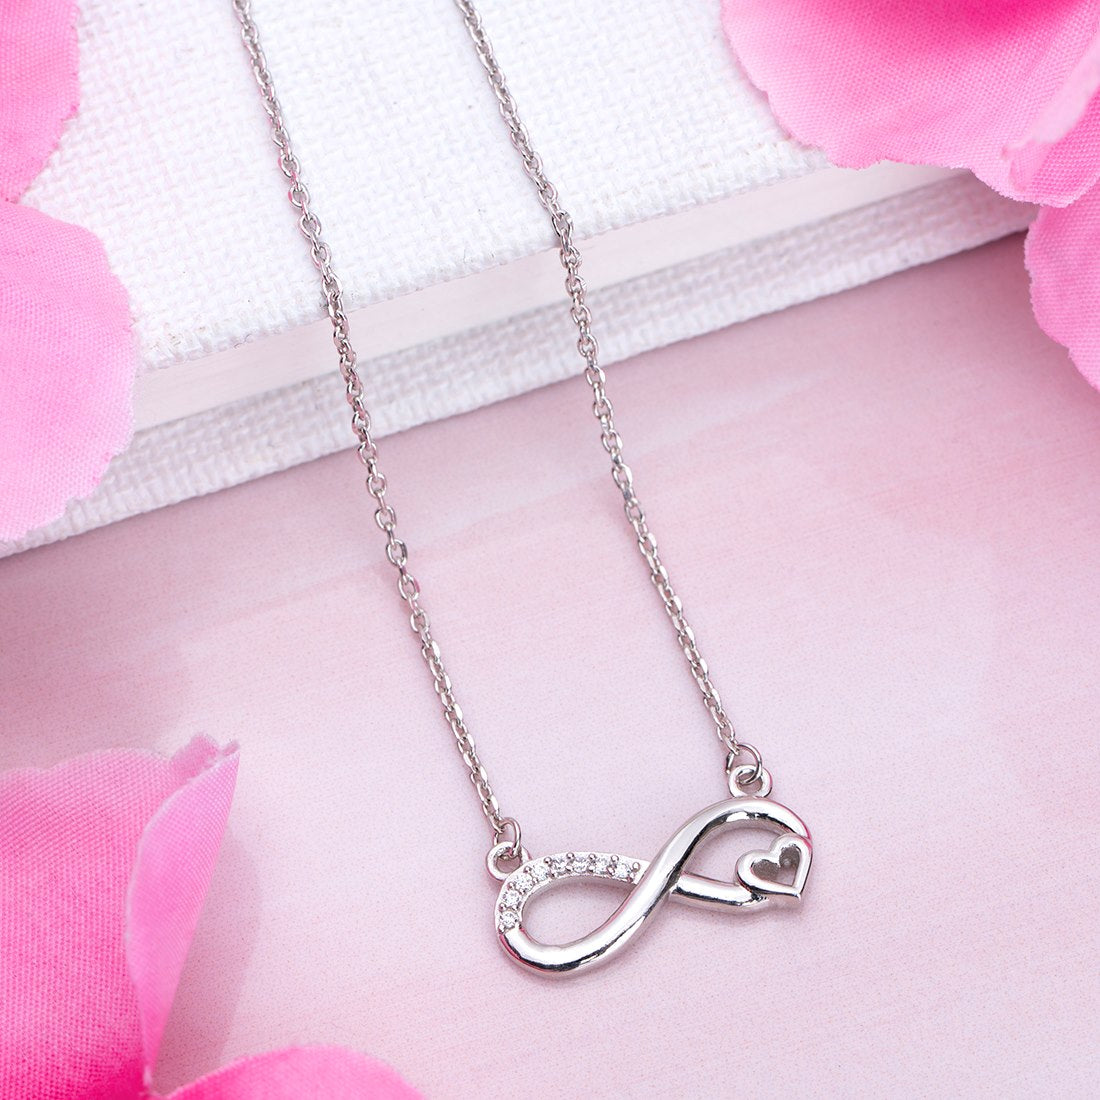 Infinite Devotion Rhodium-Plated 925 Sterling Silver Necklace